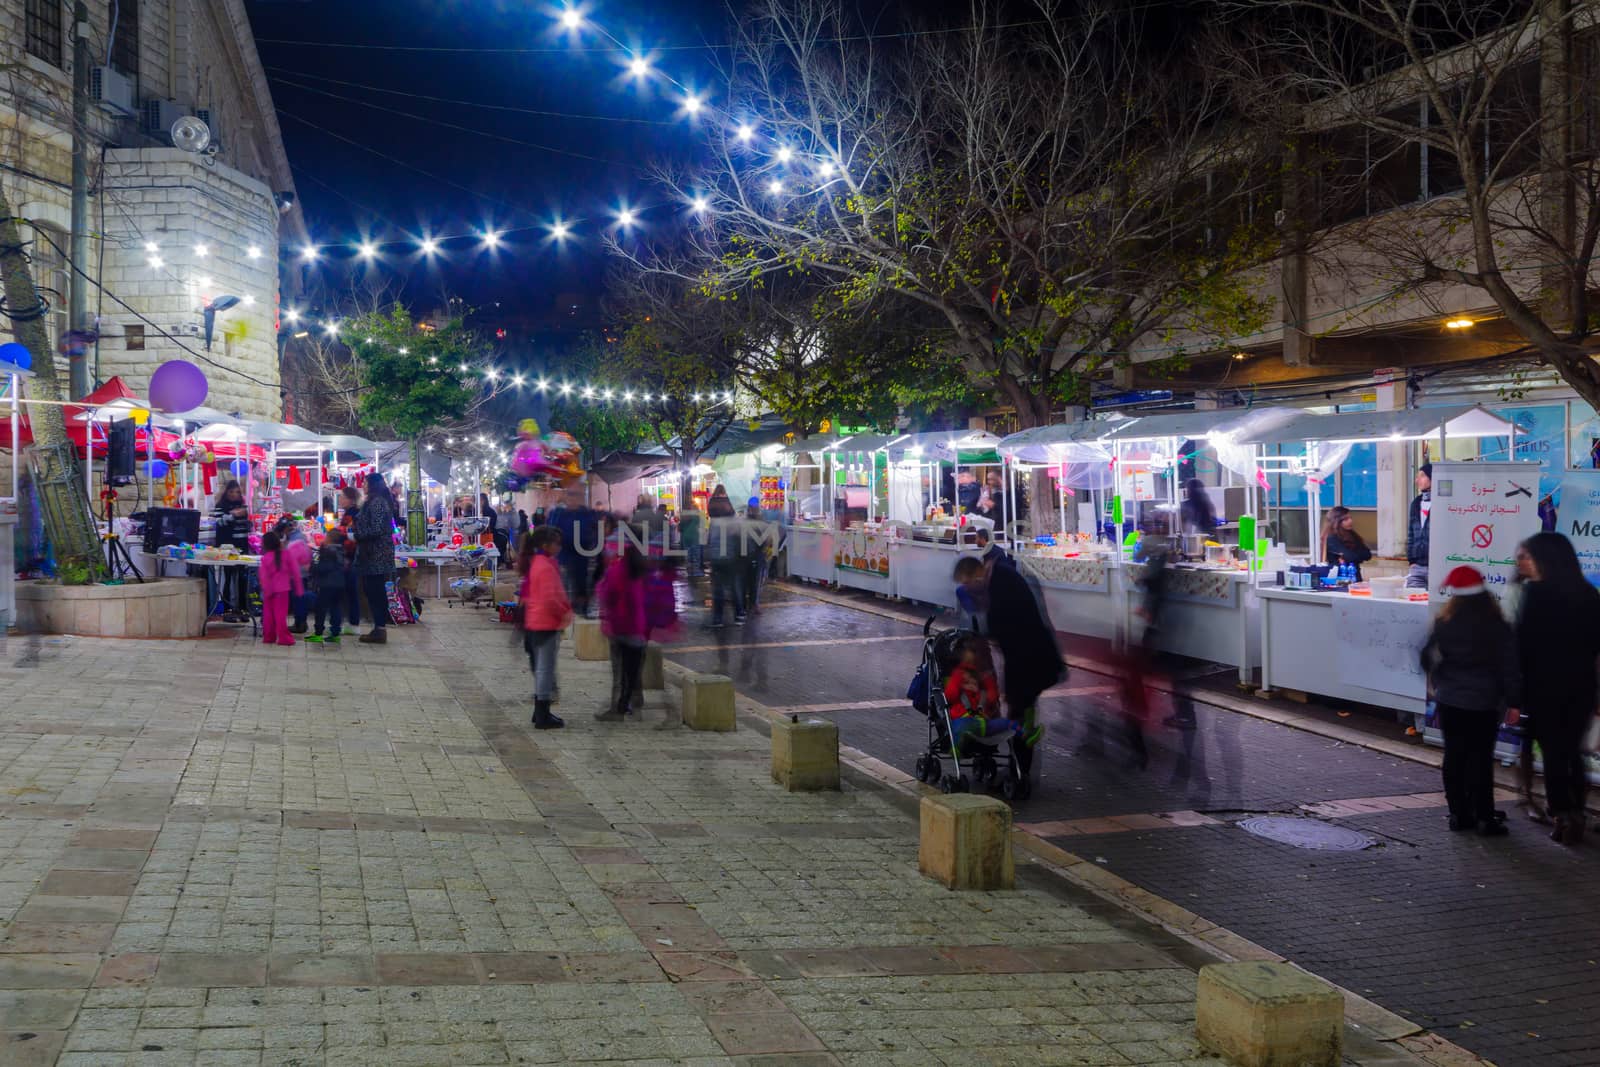 NAZARETH, ISRAEL - DECEMBER 20, 2016: Christmas market scene, with locals and tourists, in Nazareth, Israel